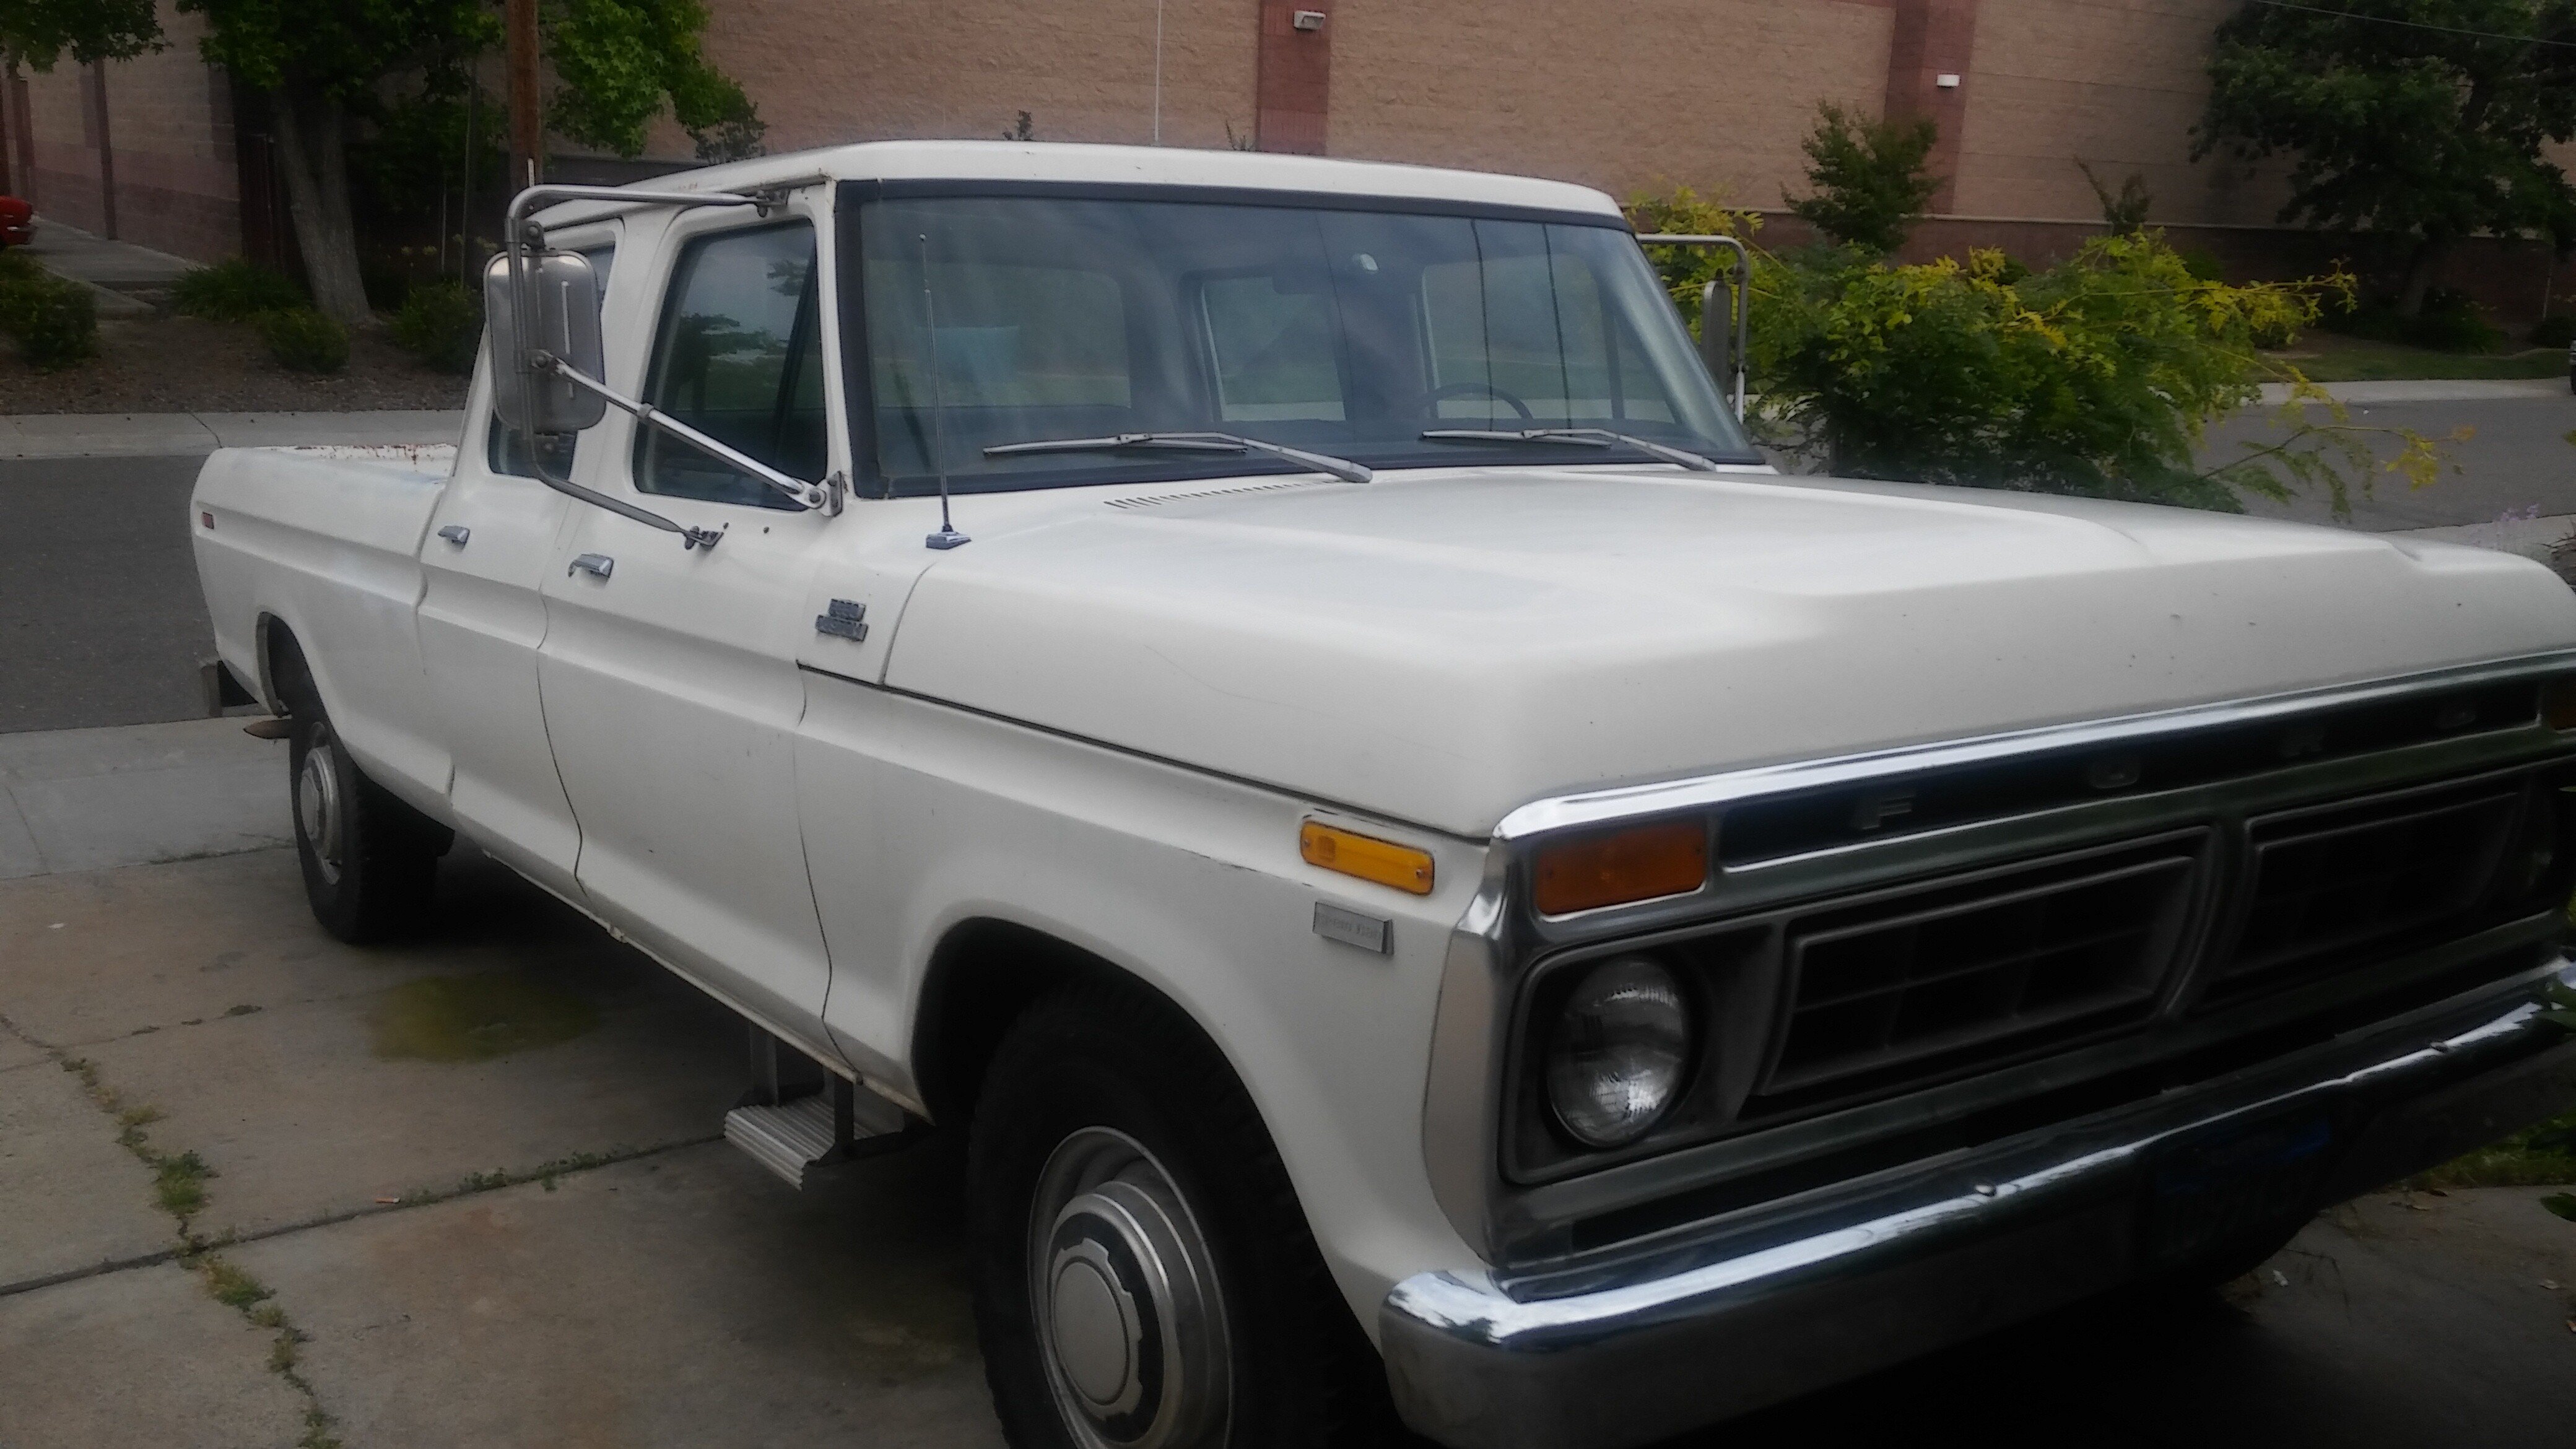 1977 Ford F350 for sale near Citrus Heights, California 95621  Classics on Autotrader